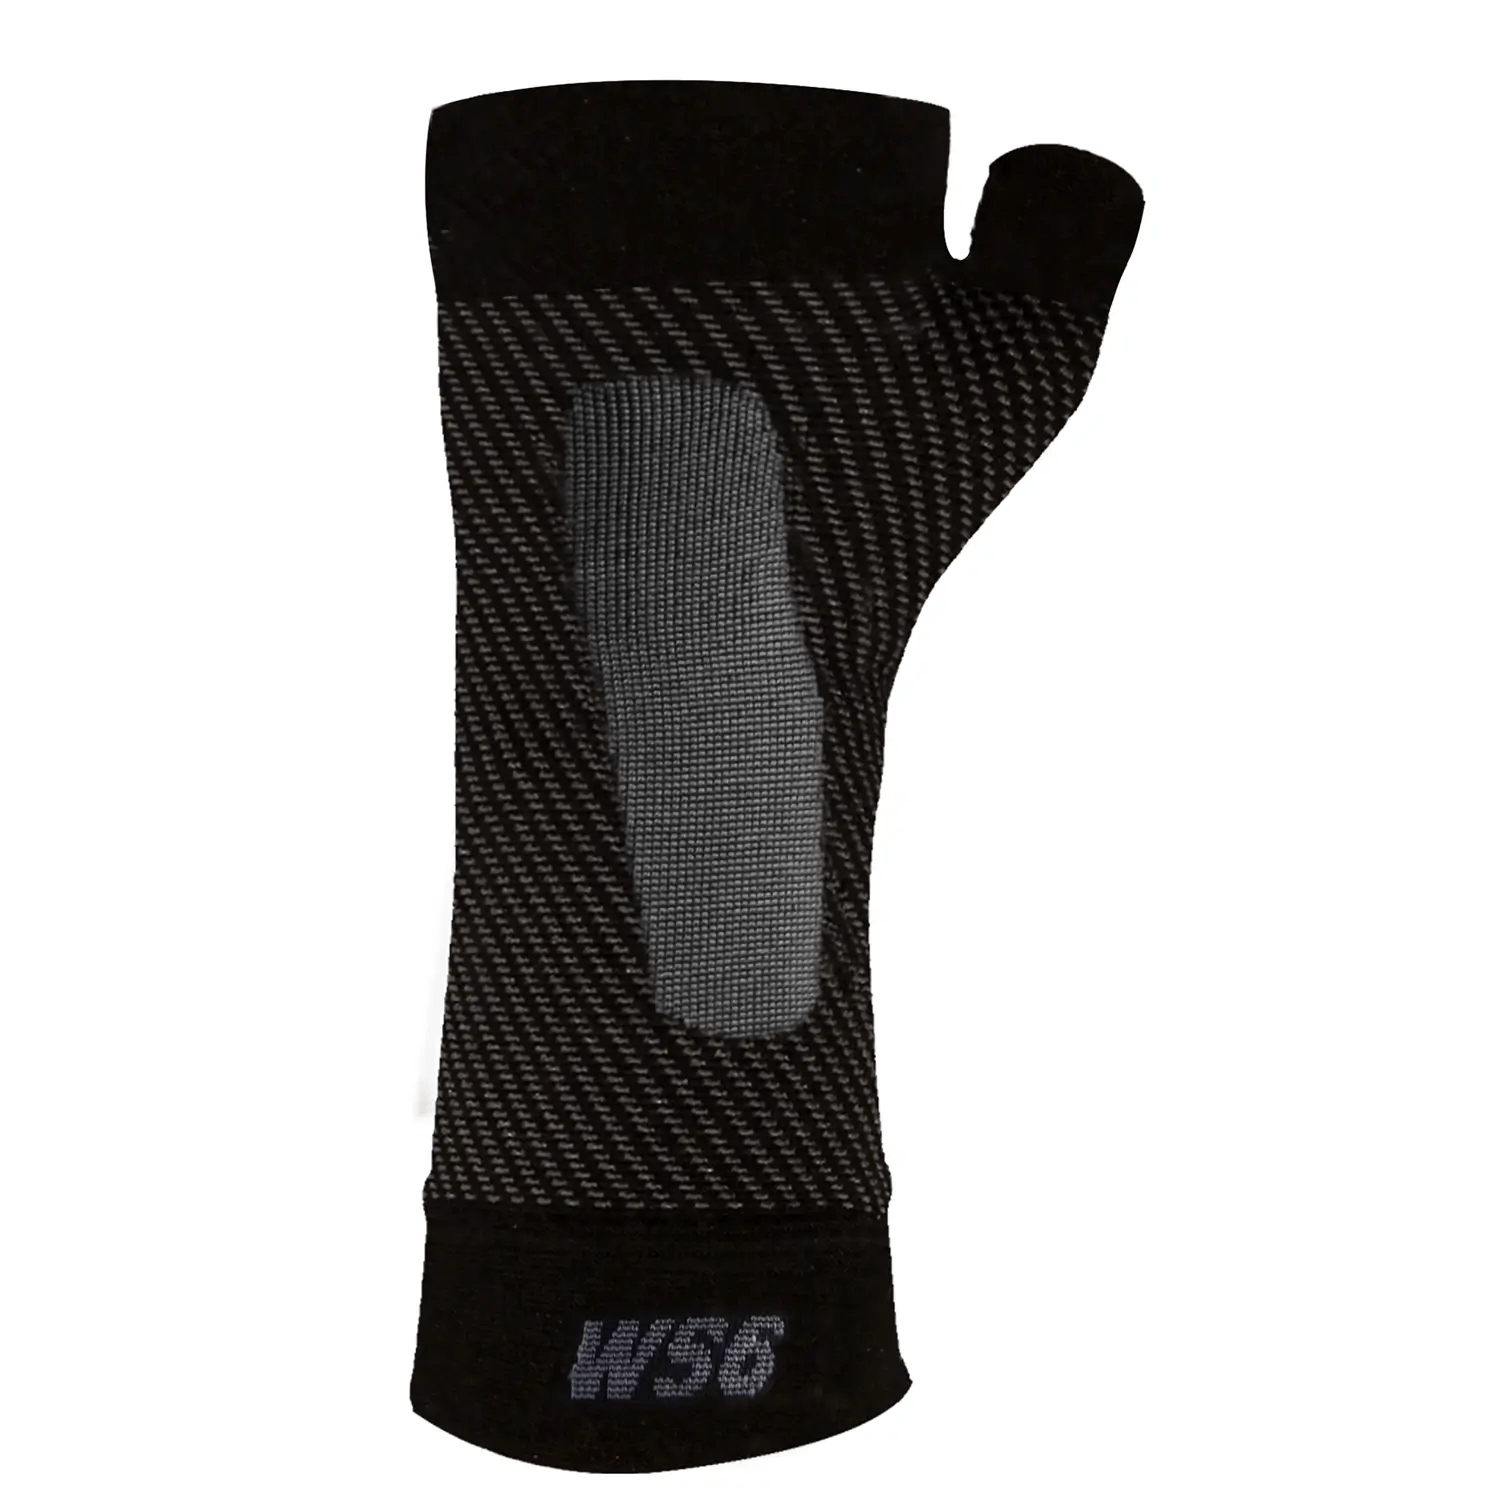 WS6 Performance Wrist Sleeve For Pain Relief